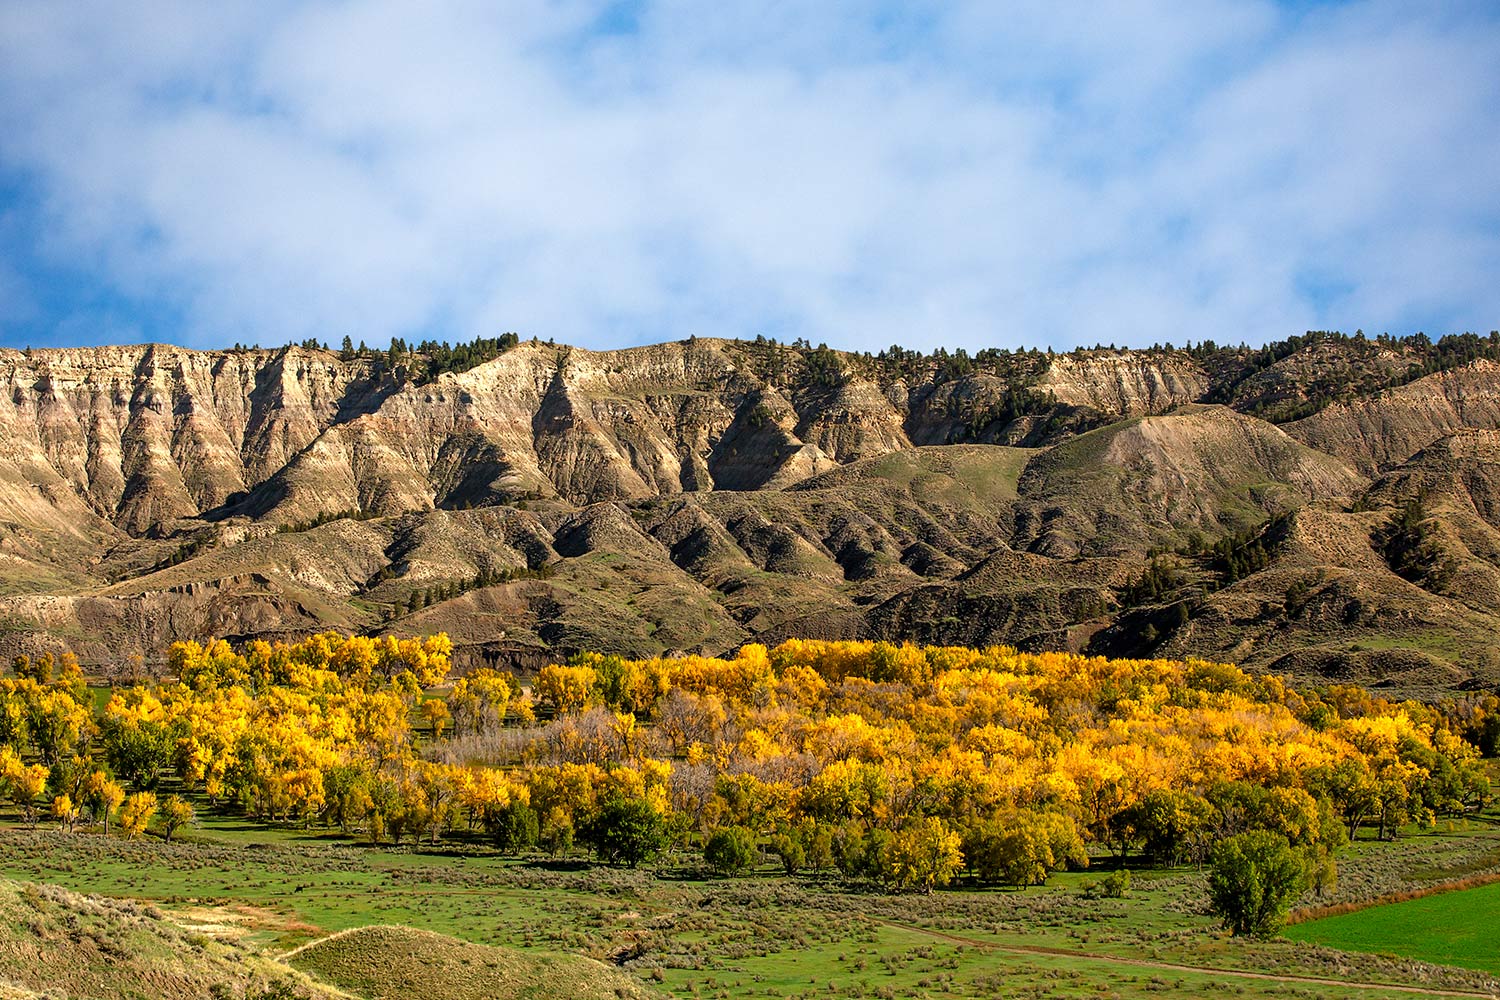 Cottonwood trees turn a beautiful hue of yellow and orange in the Judith River valley outside of Winifred, Montana.&nbsp;→ Buy a Print&nbsp;or License Photo